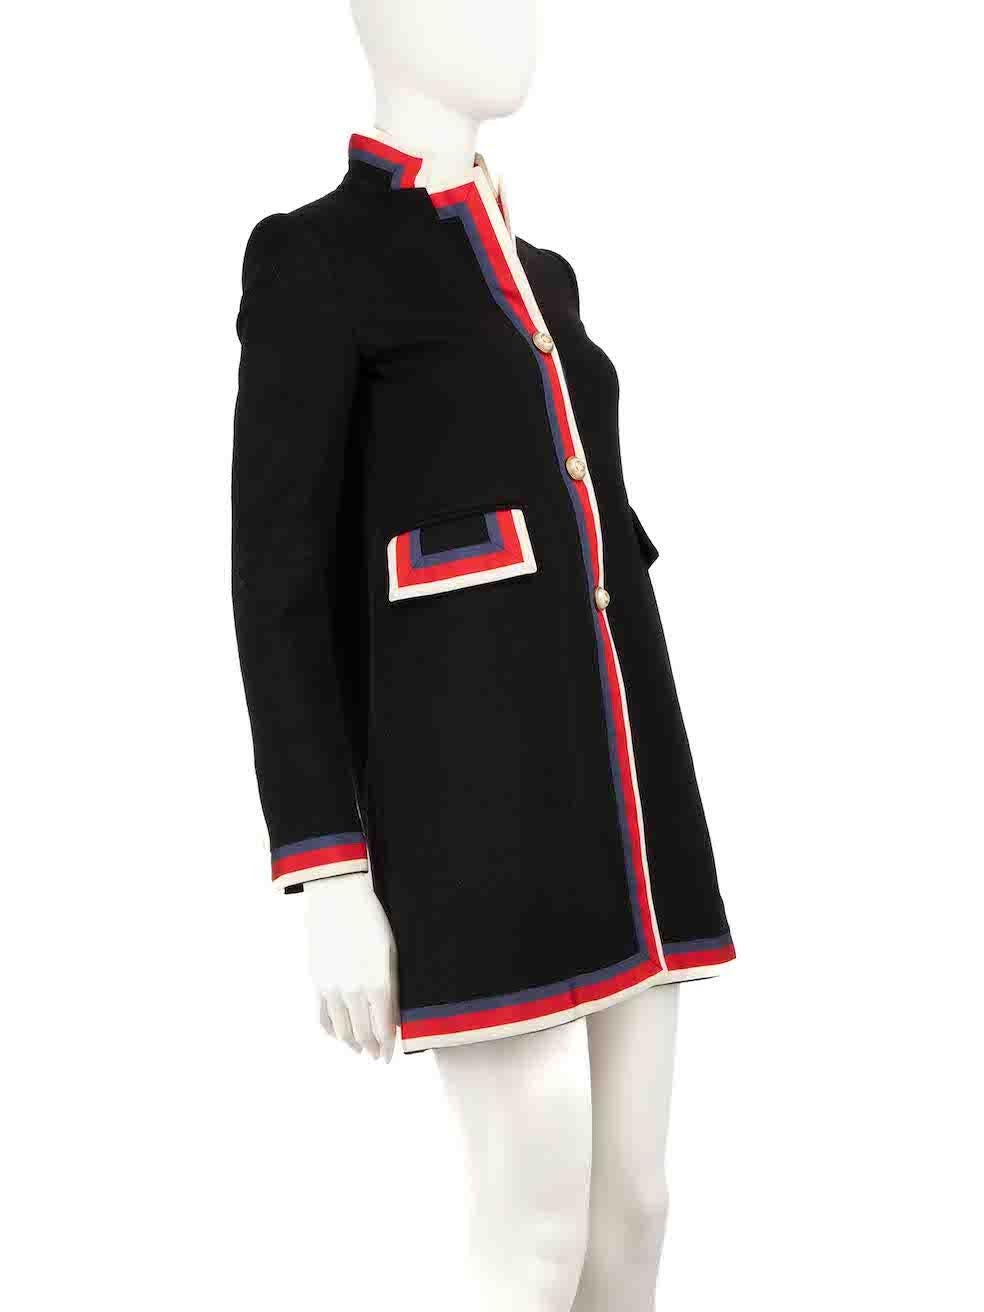 CONDITION is Very good. Minimal wear to coat is evident. Minimal discolouration around the collar, both cuffs, left border detailing and pockets on this used Gucci designer resale item.
 
 
 
 Details
 
 
 Model: Sylvie
 
 Black
 
 Wool
 
 Coat
 
